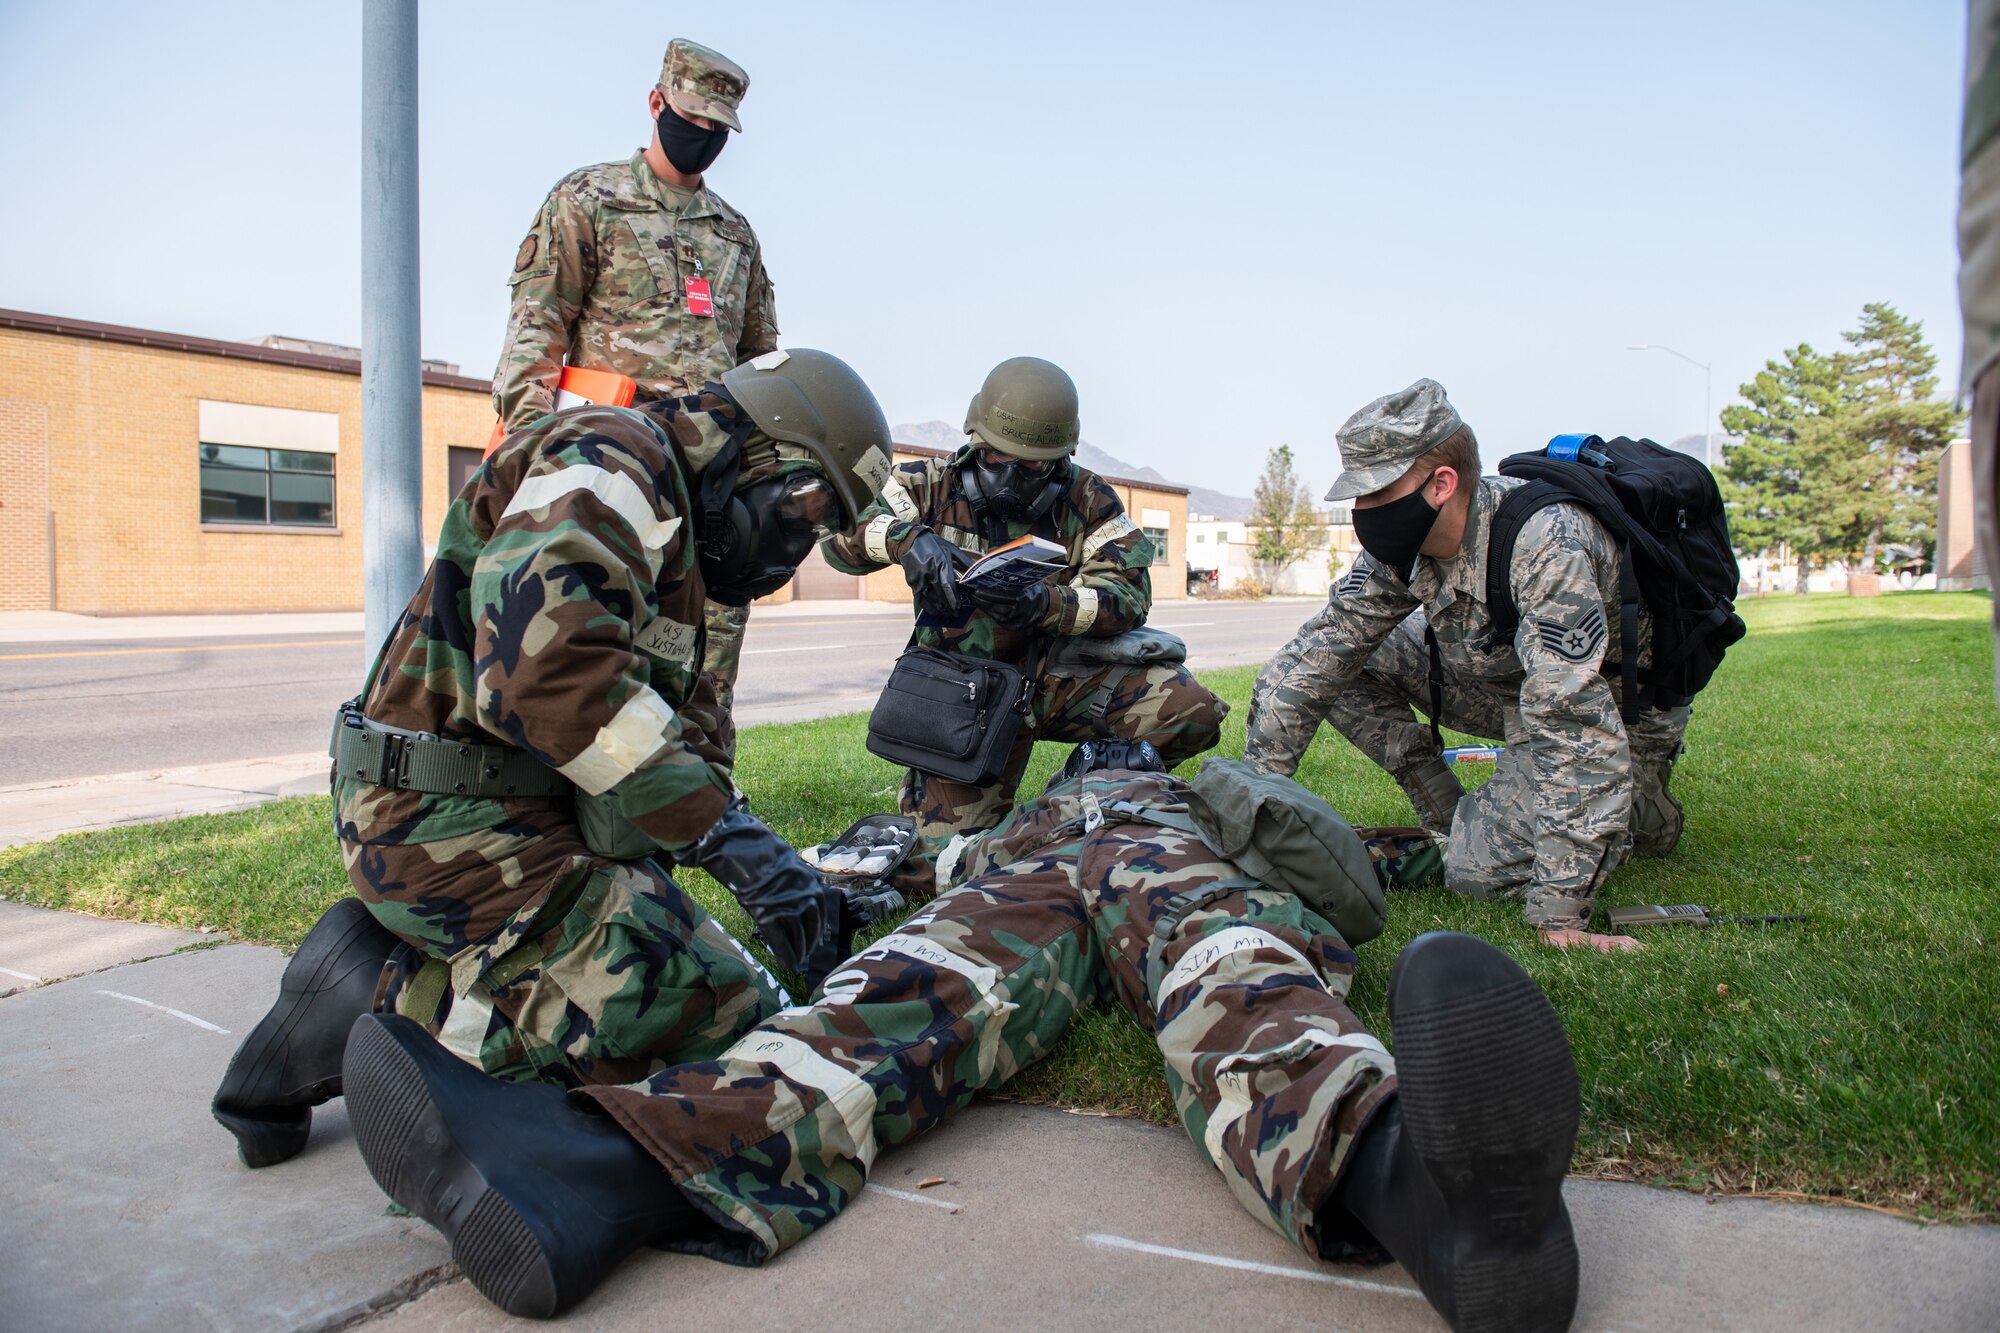 Airmen from the 388th Operations Support Squadron and the 419th Operations Support Squadron render self-aid buddy care to a fellow Airman during a training exercise